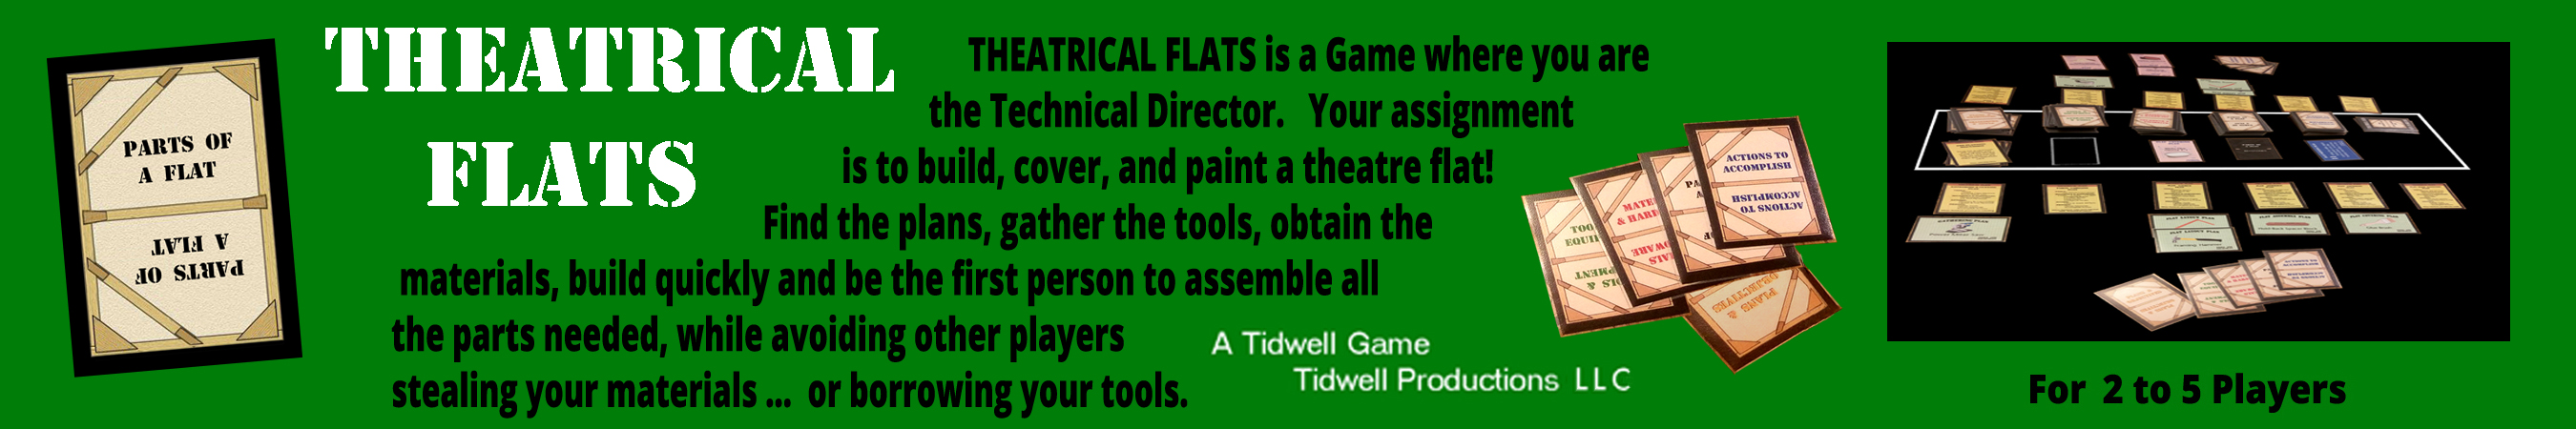 Theatrical Flats game